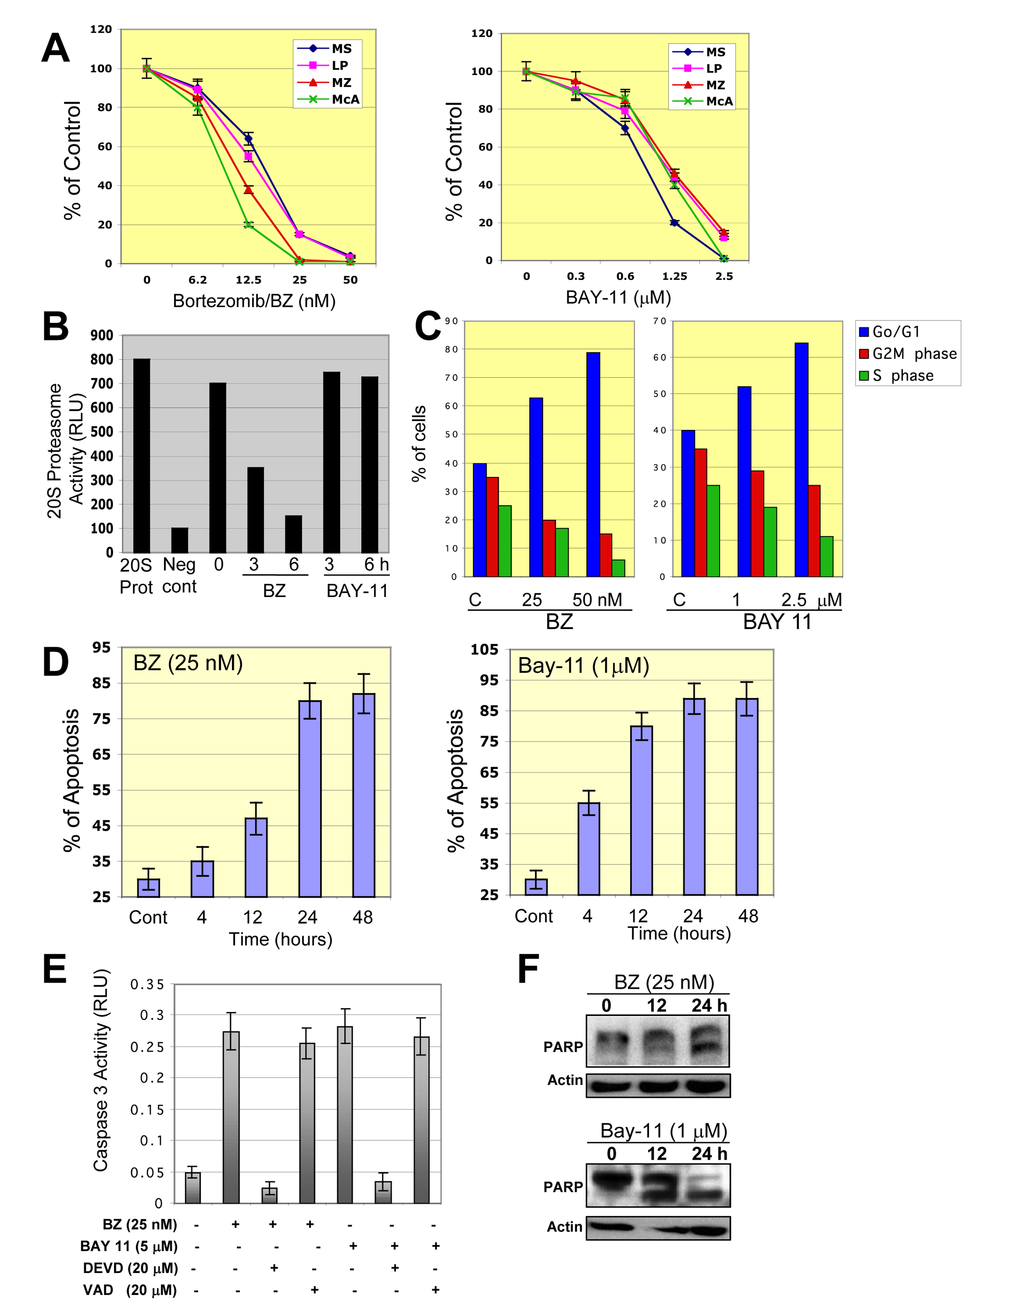 Inhibition of NF-κB in DLBCL cells leads to cell growth inhibition, G0/G1 cell cycle arrest, and apoptosis. (A) Representative ABC- and GCB-DLBCL cell lines were treated with bortezomib (BZ) or BAY-11 for 48 hours and cell proliferation was measured using 3H-thymidine incorporation assays. The percentages of growth inhibition of treated cells relative to untreated (control cells) were plotted. The data shown are the means and ranges of triplicate cultures from three independent experiments. (B) DLBCL-MS cells were cultured in the absence or presence of bortezomib (BZ) or BAY-11 and subjected to a 20S proteasome assay. Purified 20S proteasome was used as a positive control. Abbreviations: RLU, relative light unit; 20S pro, 20S proteasome, Neg Cont., negative control. (C) DLBCL-MS cells were cultured in the absence or presence of BZ (50 nM) or BAY-11 (1 µM) and analyzed for cell cycle profile. The percentages of cells in G0/G1, S, and G2M phases are shown. (D) DLBCL-MS cells were cultured in the absence or presence of BZ (50 nM) or BAY-11 (1 µM) for the indicated time points and then analyzed for apoptosis using annexin V assays. (E) DLBCL-MS cells were cultured in the presence of BZ (50 nM) or BAY-11 (1 µM) and in some cases with the caspase 3 inhibitor DEVD or the caspse 1 inhibitor VAD. Caspase 3 activity was measured after 24 hours of treatments. Caspase 3 activity was observed after 12 hours of treatment. Abbreviations: RLU, relative light units. (F) DLBCL-MS cells were cultured in the presence of BZ (50 nM) or BAY-11 (1 µM) for the indicated time points and cell extracts were subjected to Western blotting for a known caspase substrate, poly-(ADP-ribose) polymerase (PARP) cleavage.